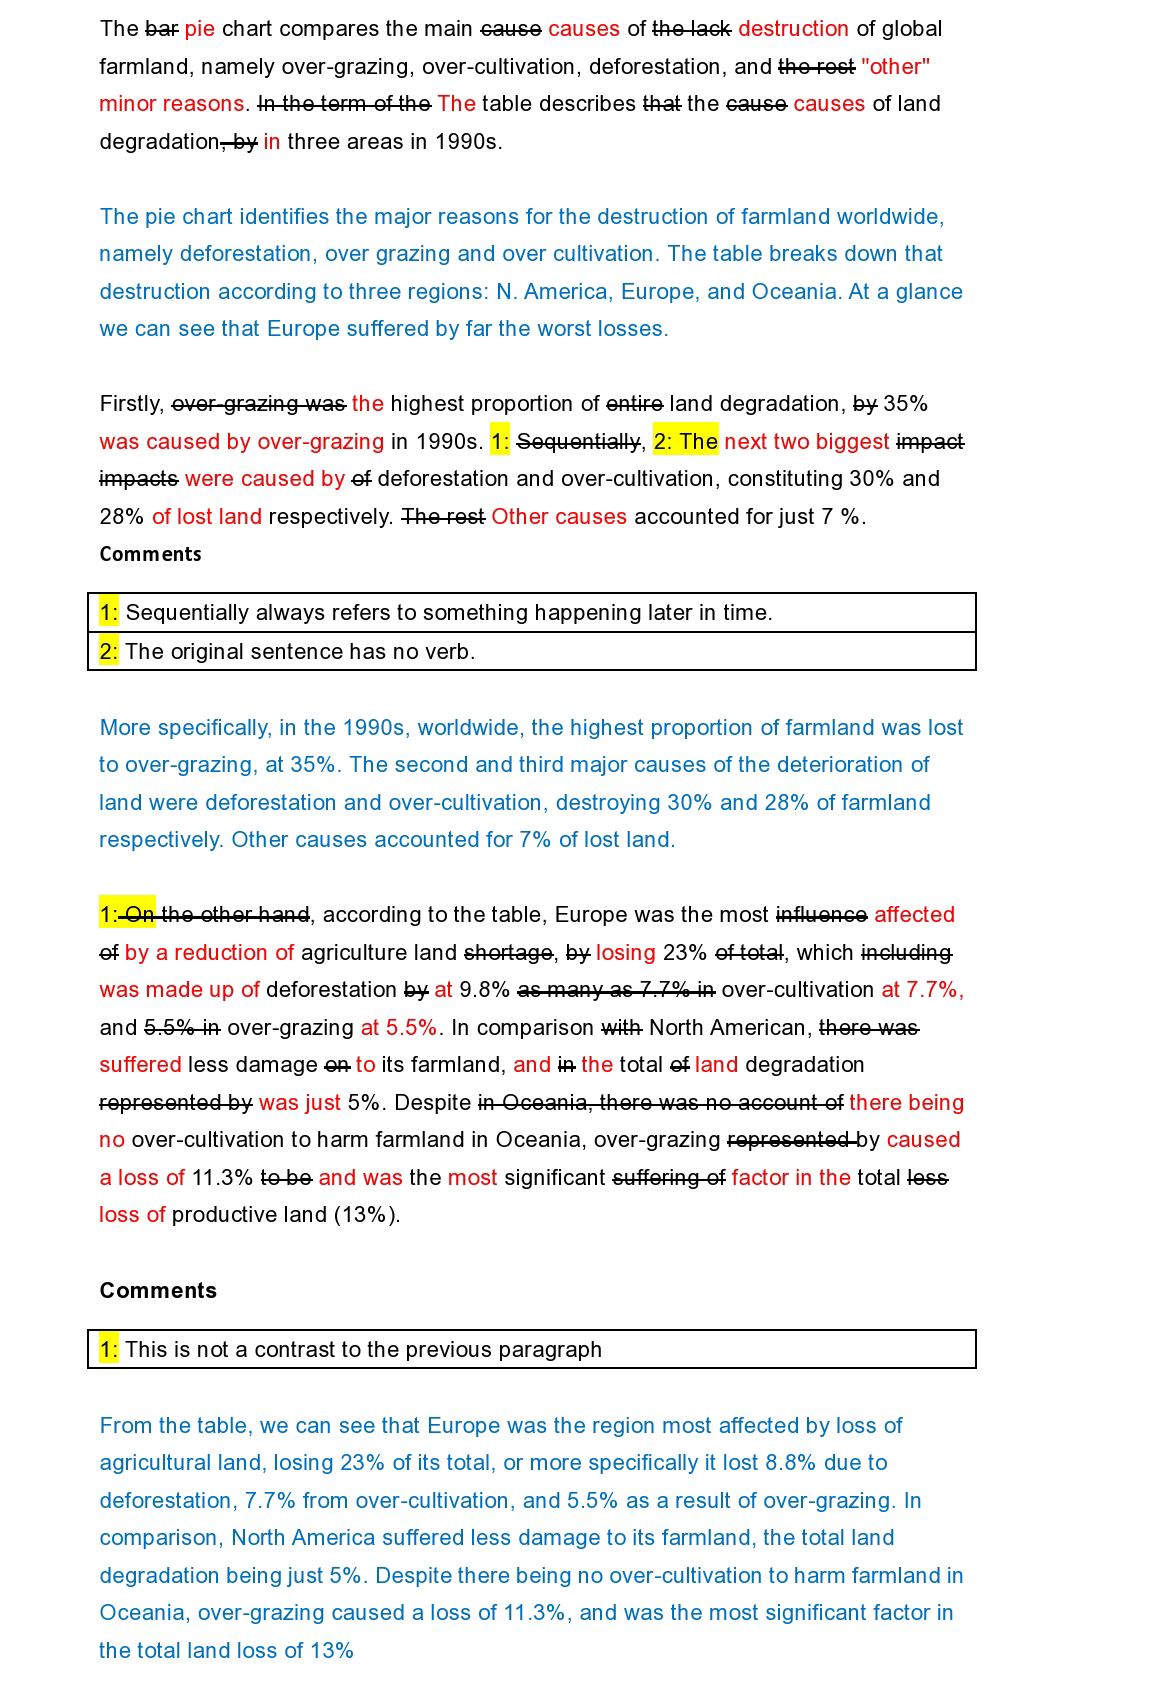 Ielts Writing Task 1 Pie Chart And Table Sample